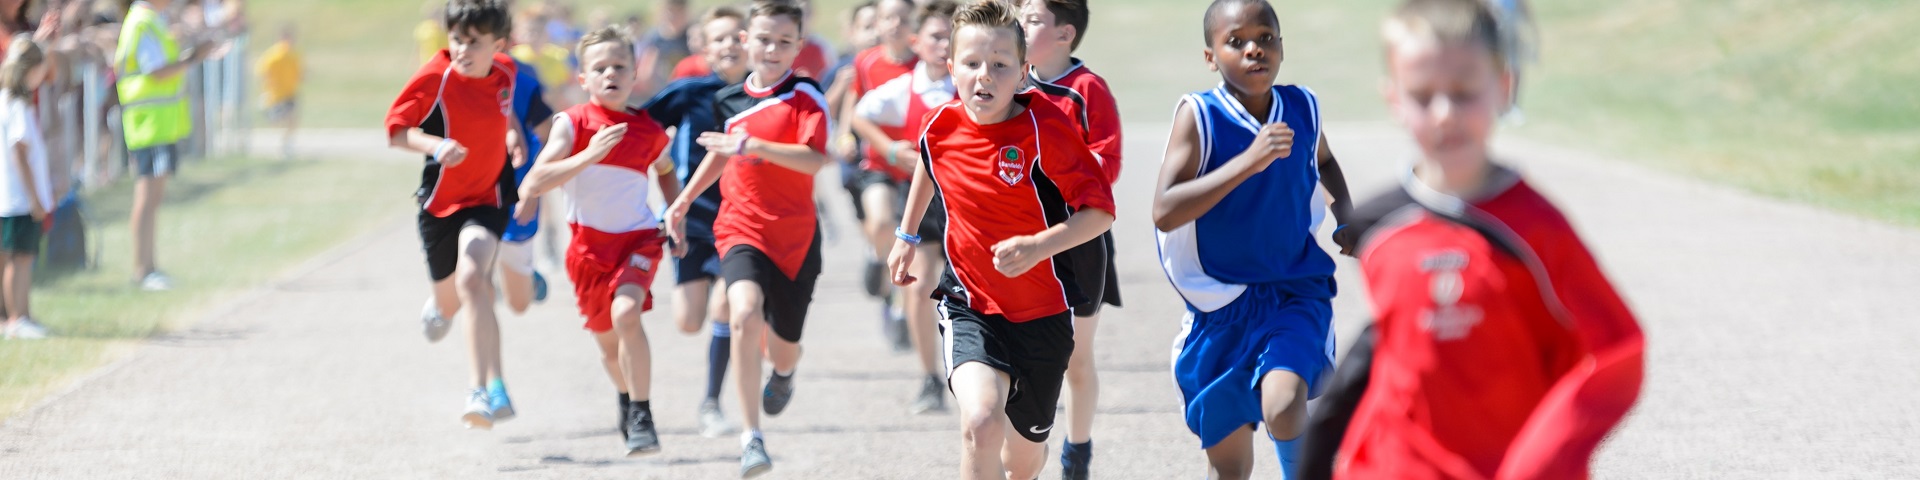 Staffordshire and Stoke on trent school games